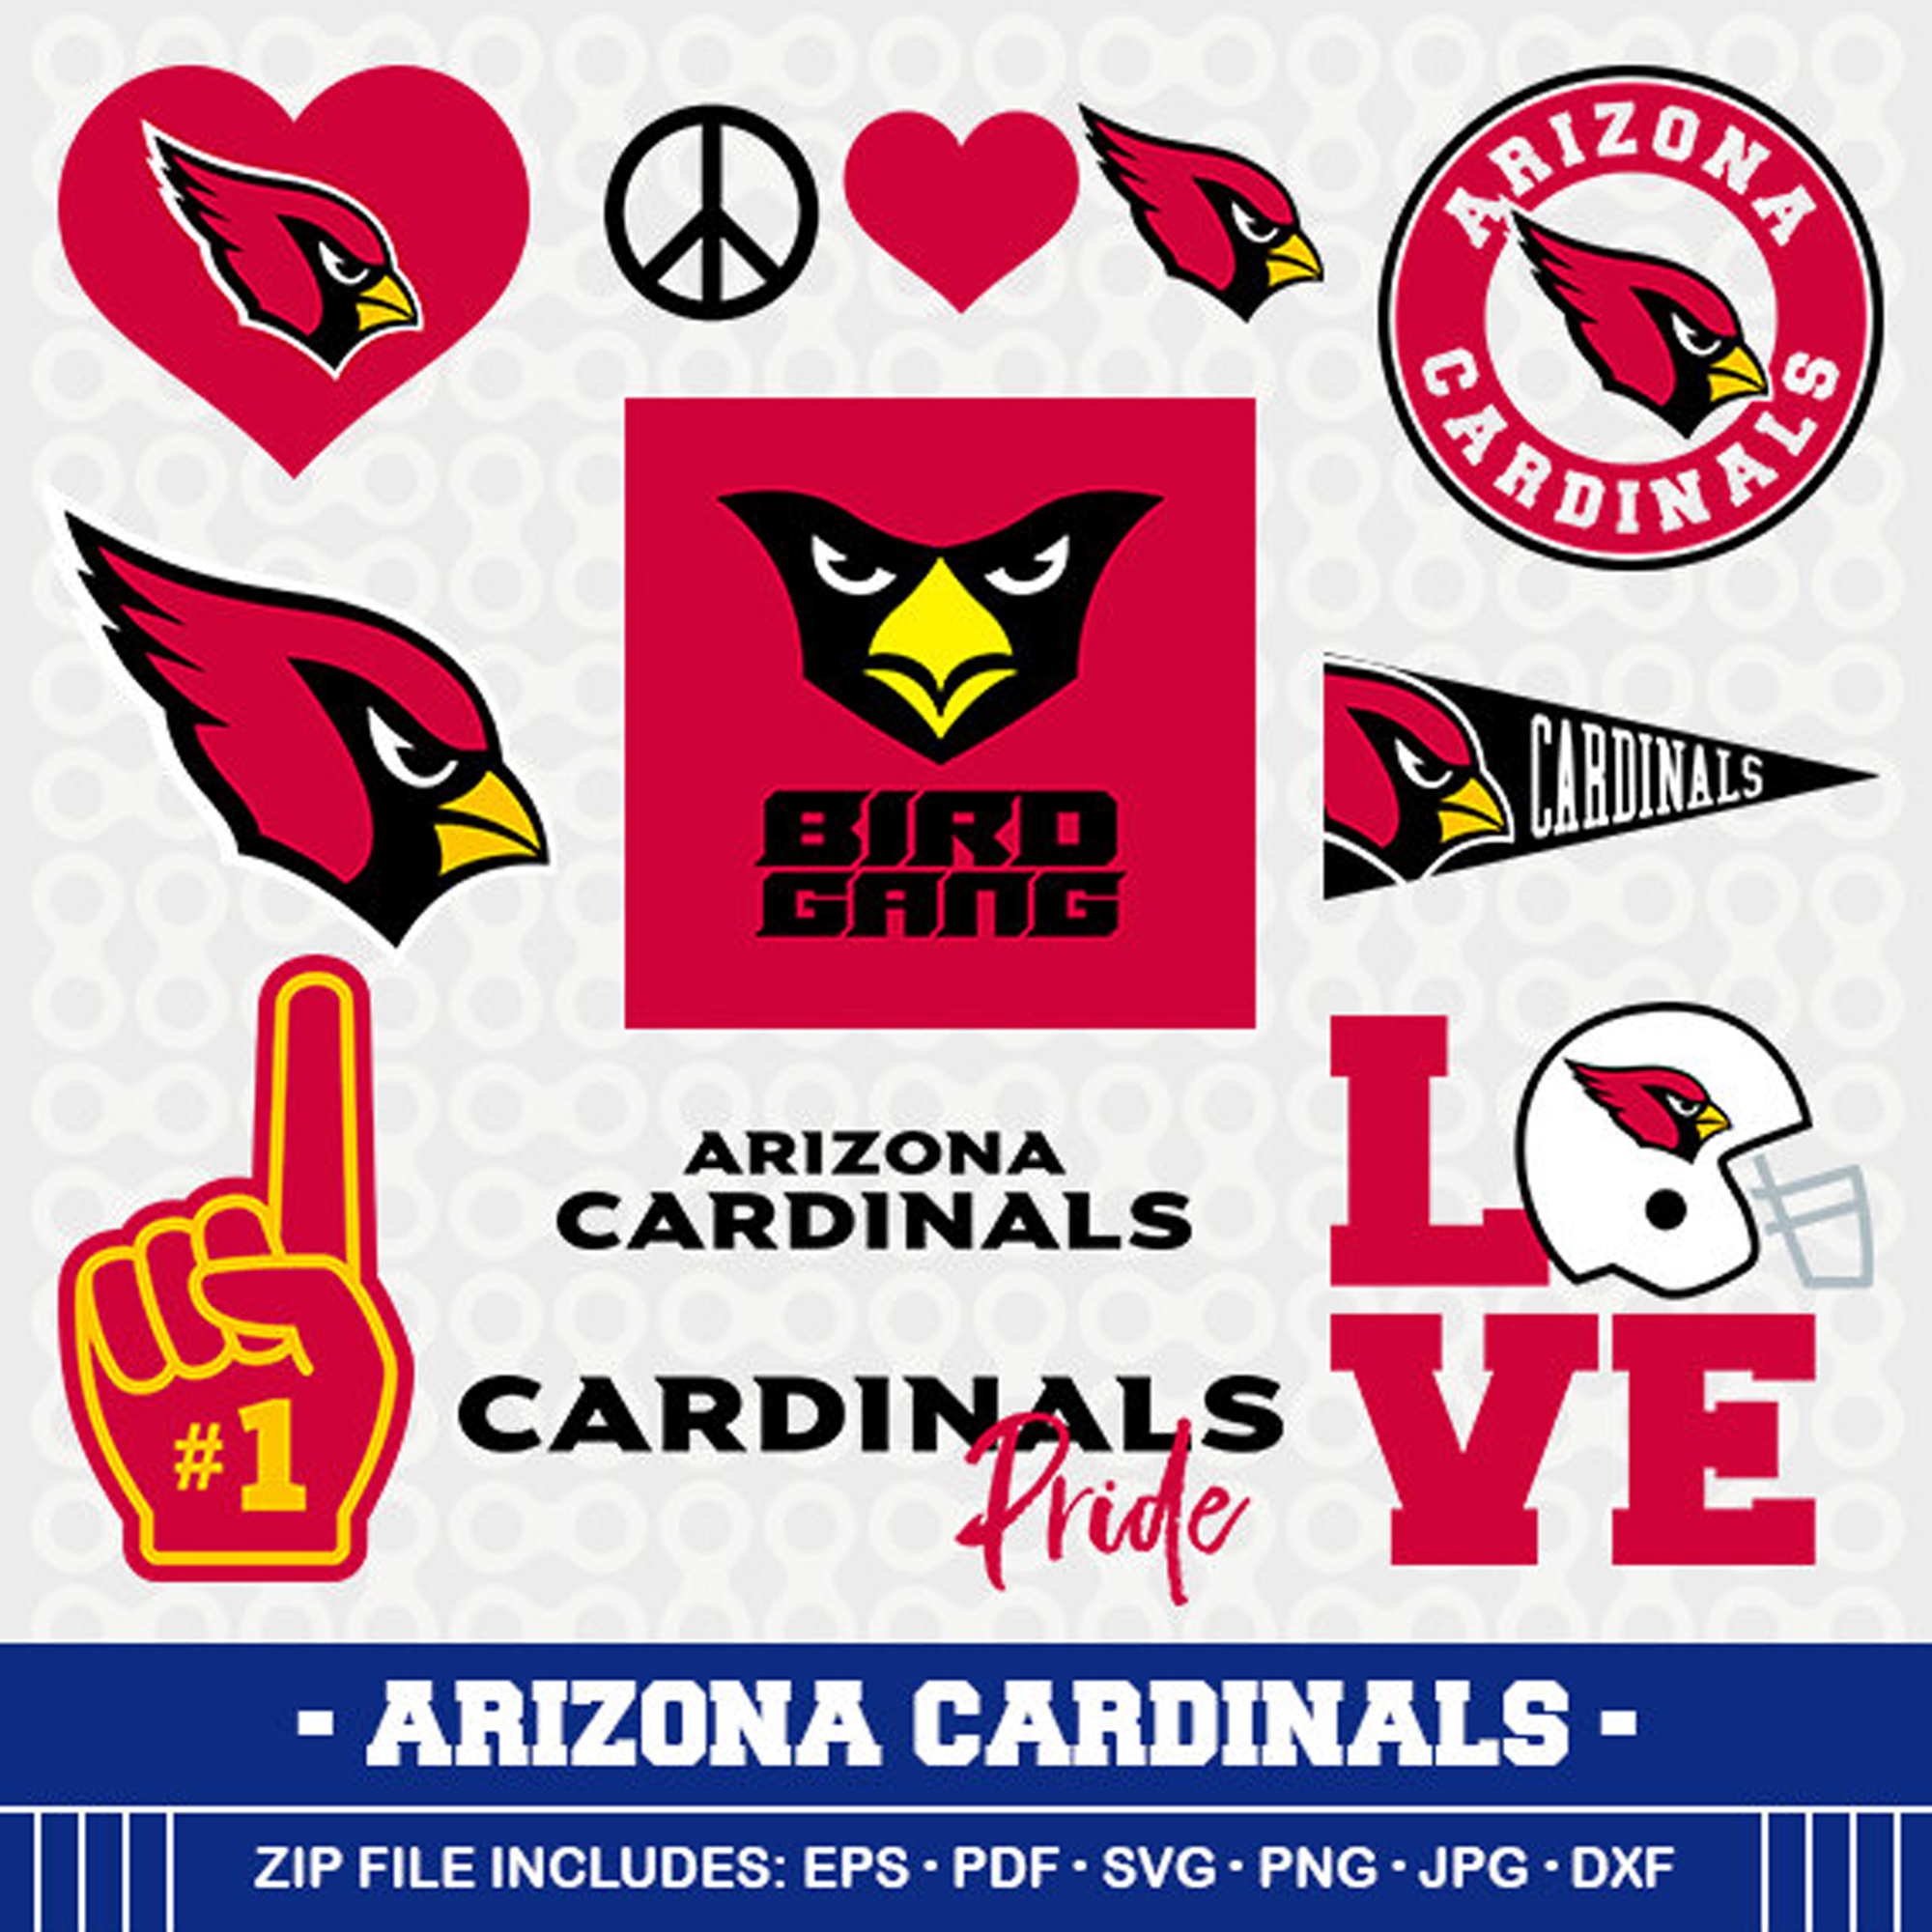 Arizona Cardinals SVG File – Vector Design in, Svg, Eps, Dxf, and